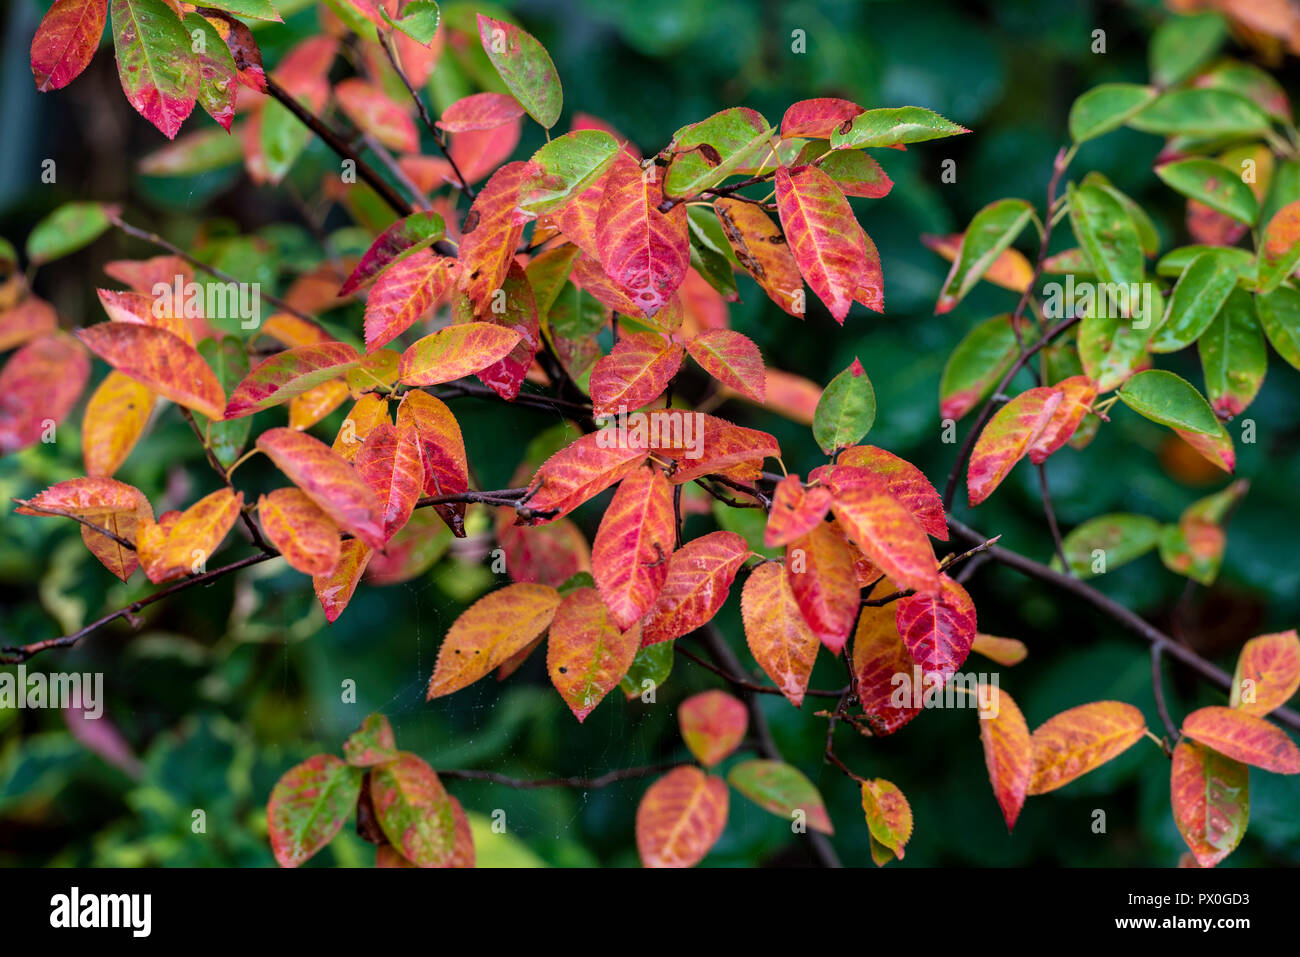 Autumn colour of Amelanchier Canadensis, serviceberry. Leaves turning red taking on the fall color. Stock Photo